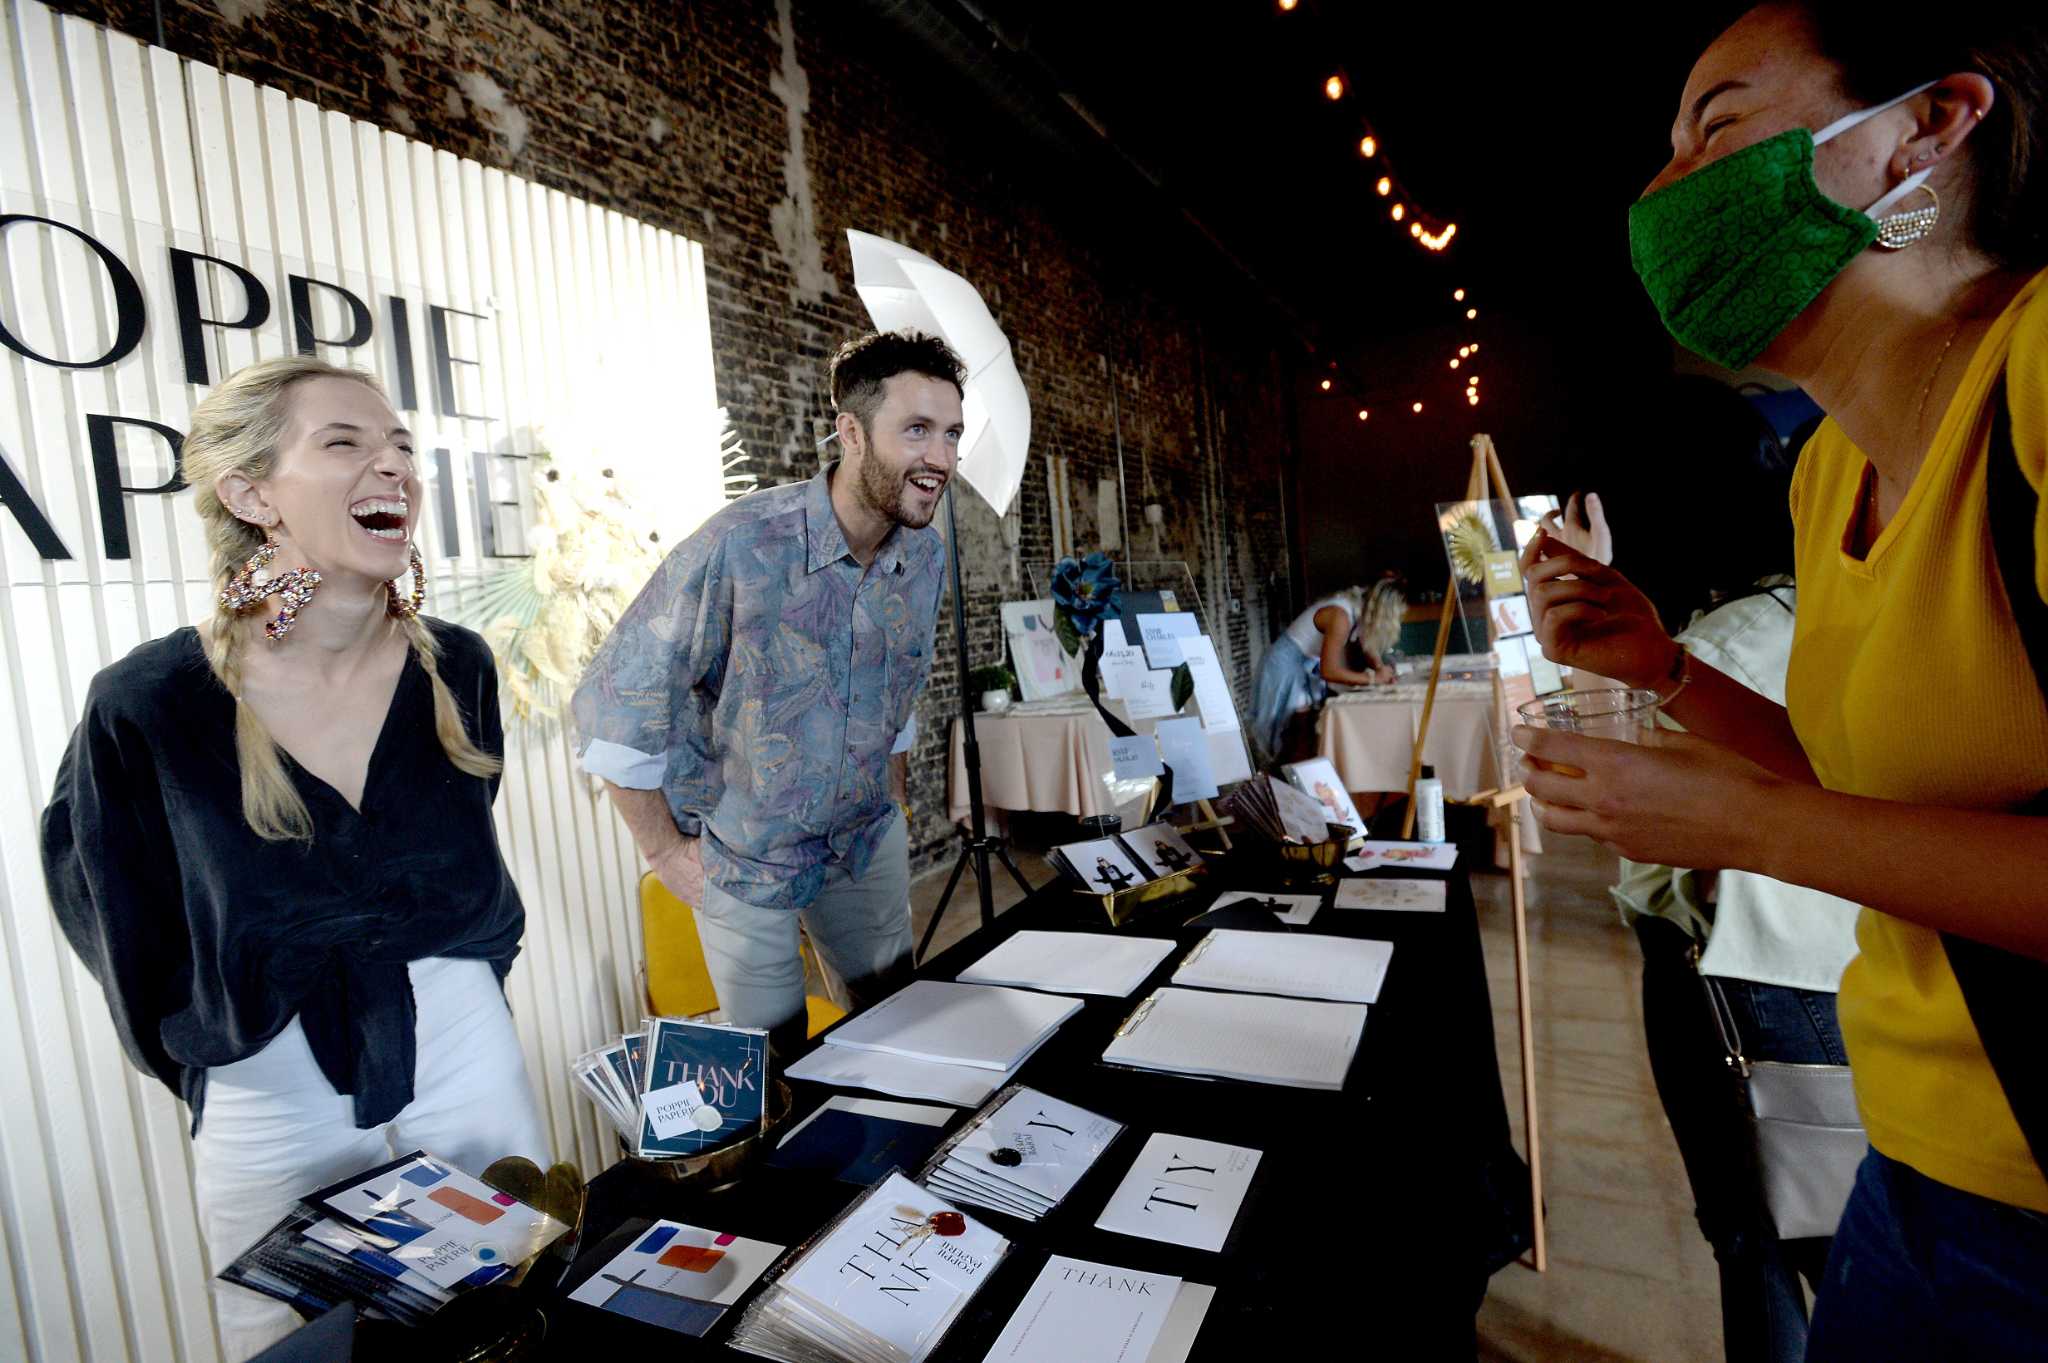 First Thursday Pop-Up helps small business, feeds crowd hungry for events